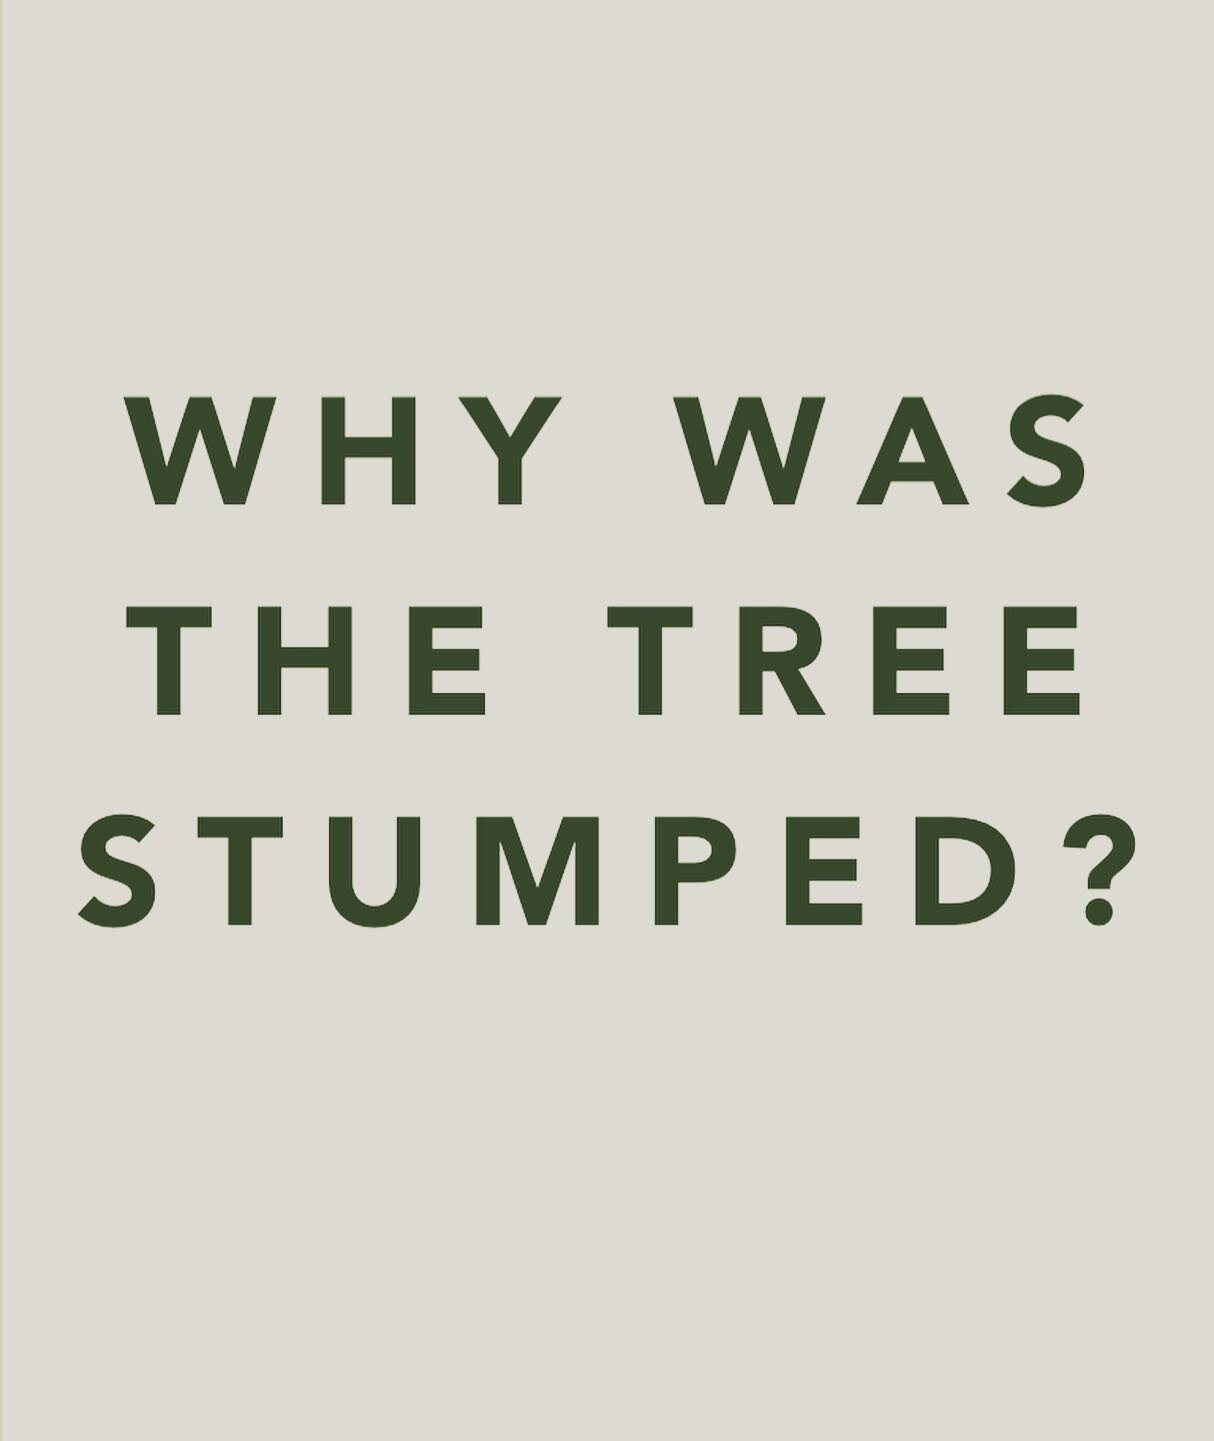 Tree puns are the best puns. Swipe for the answer. 🌳 #troot